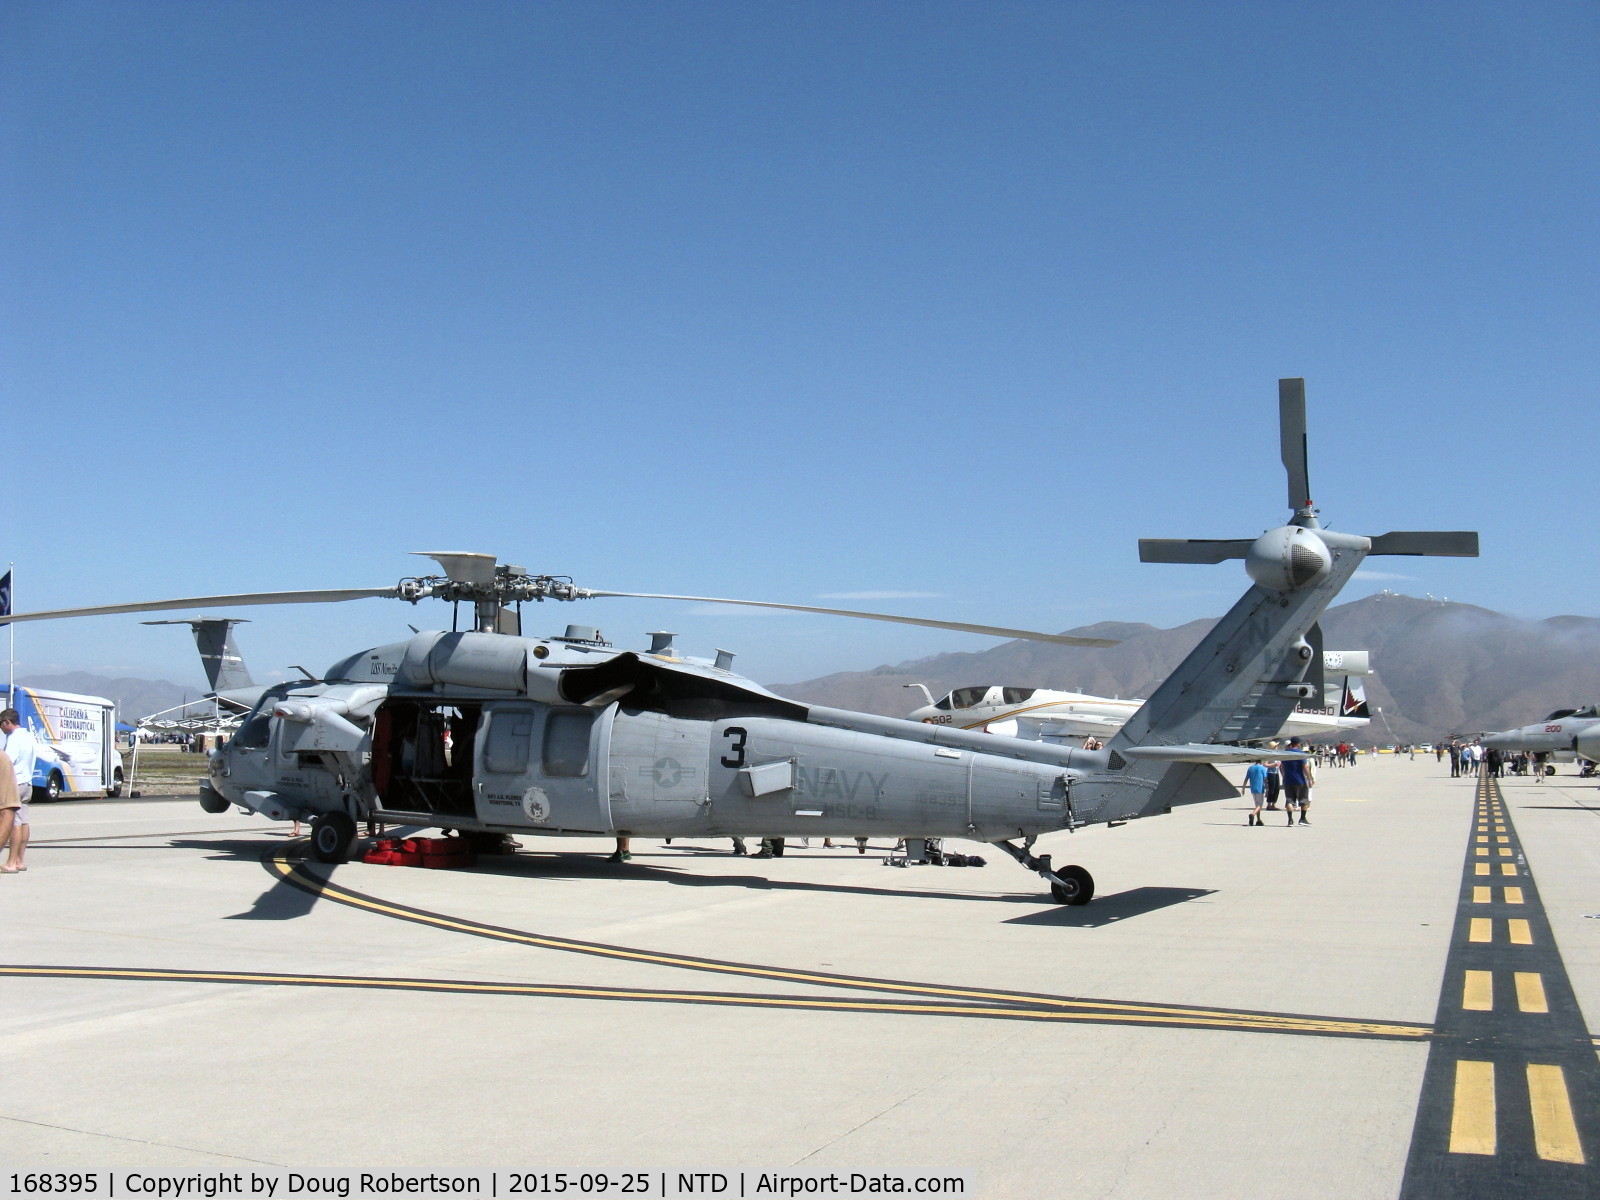 168395, Sikorsky MH-60S SeaHawk C/N Not found 168395, Sikorsky MH-60S SEAHAWK, two General Electric T700-GE-401C navalized turboshafts 1,690 shp each. Foldable rotor blades, foldable tail pylon, Multi-mission ASW, SAR, Vertrep, in-flight or hover refueler. One Big Mother of HSC-8.